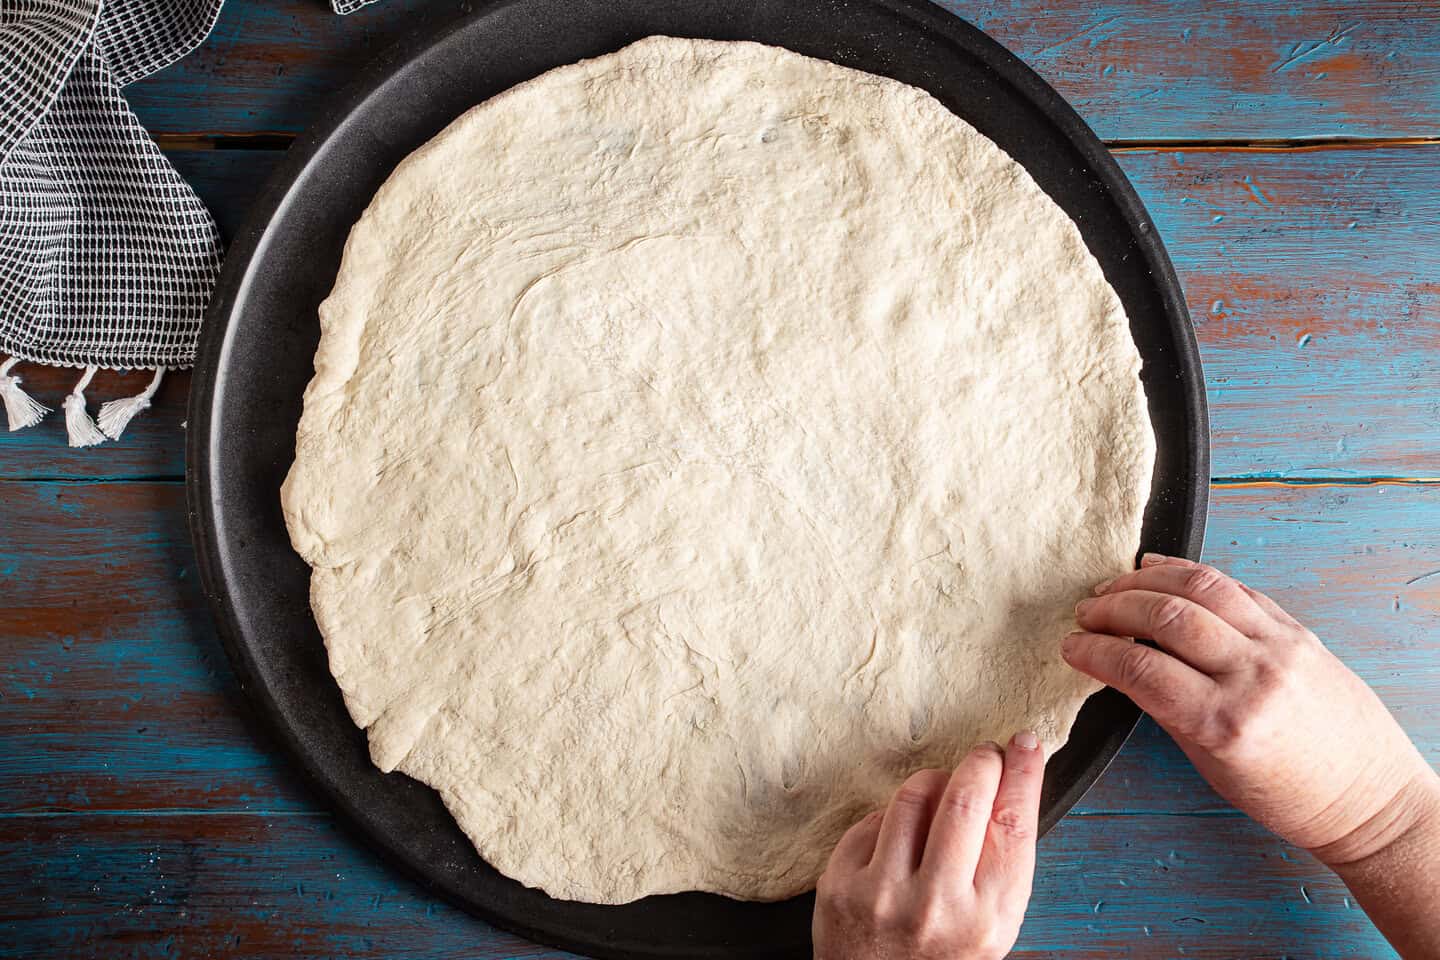 Stretching pizza dough over a pizza pan.